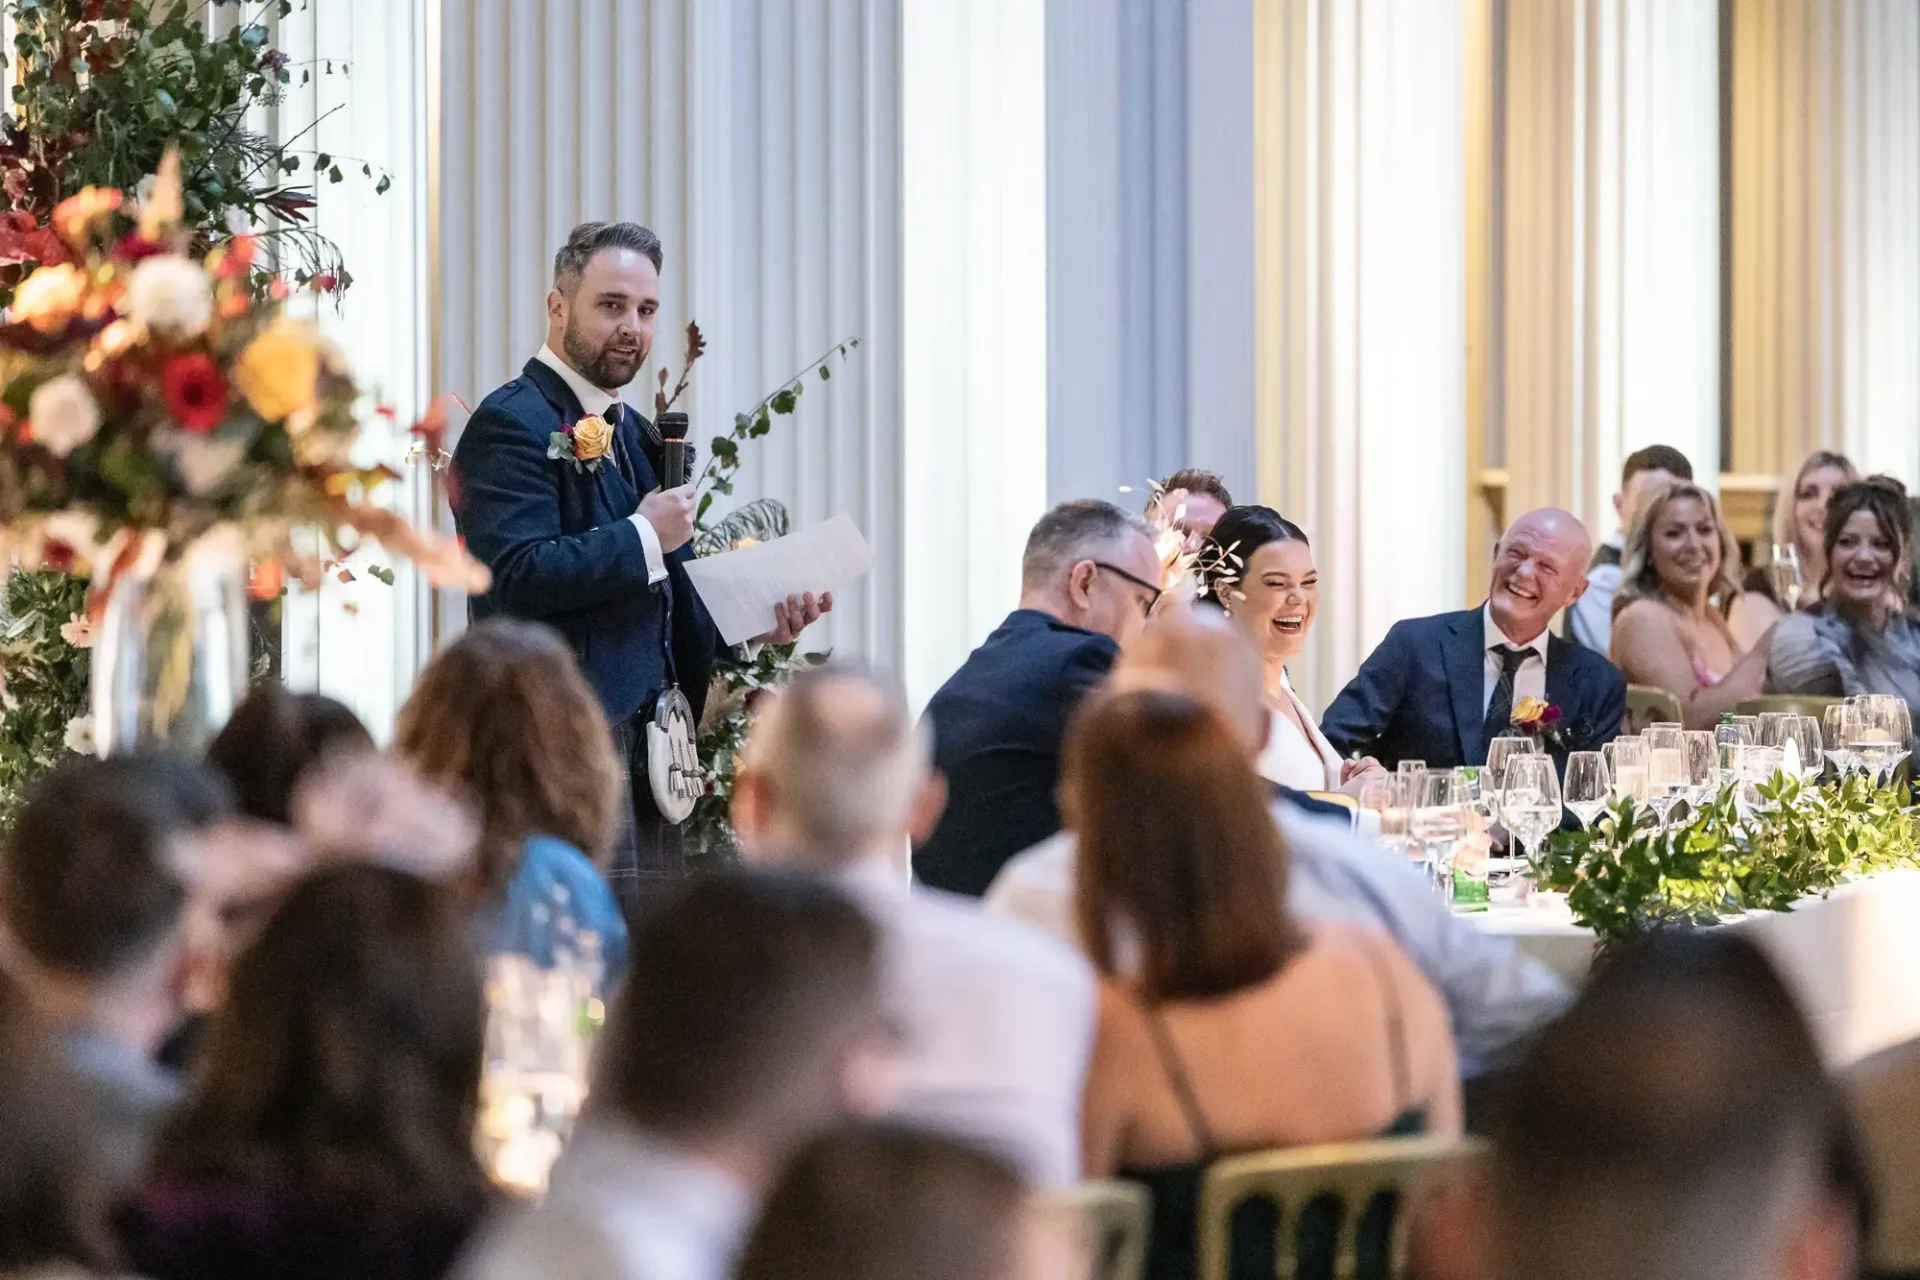 Man giving a speech at a wedding reception, holding a microphone, with guests seated at tables listening and smiling.